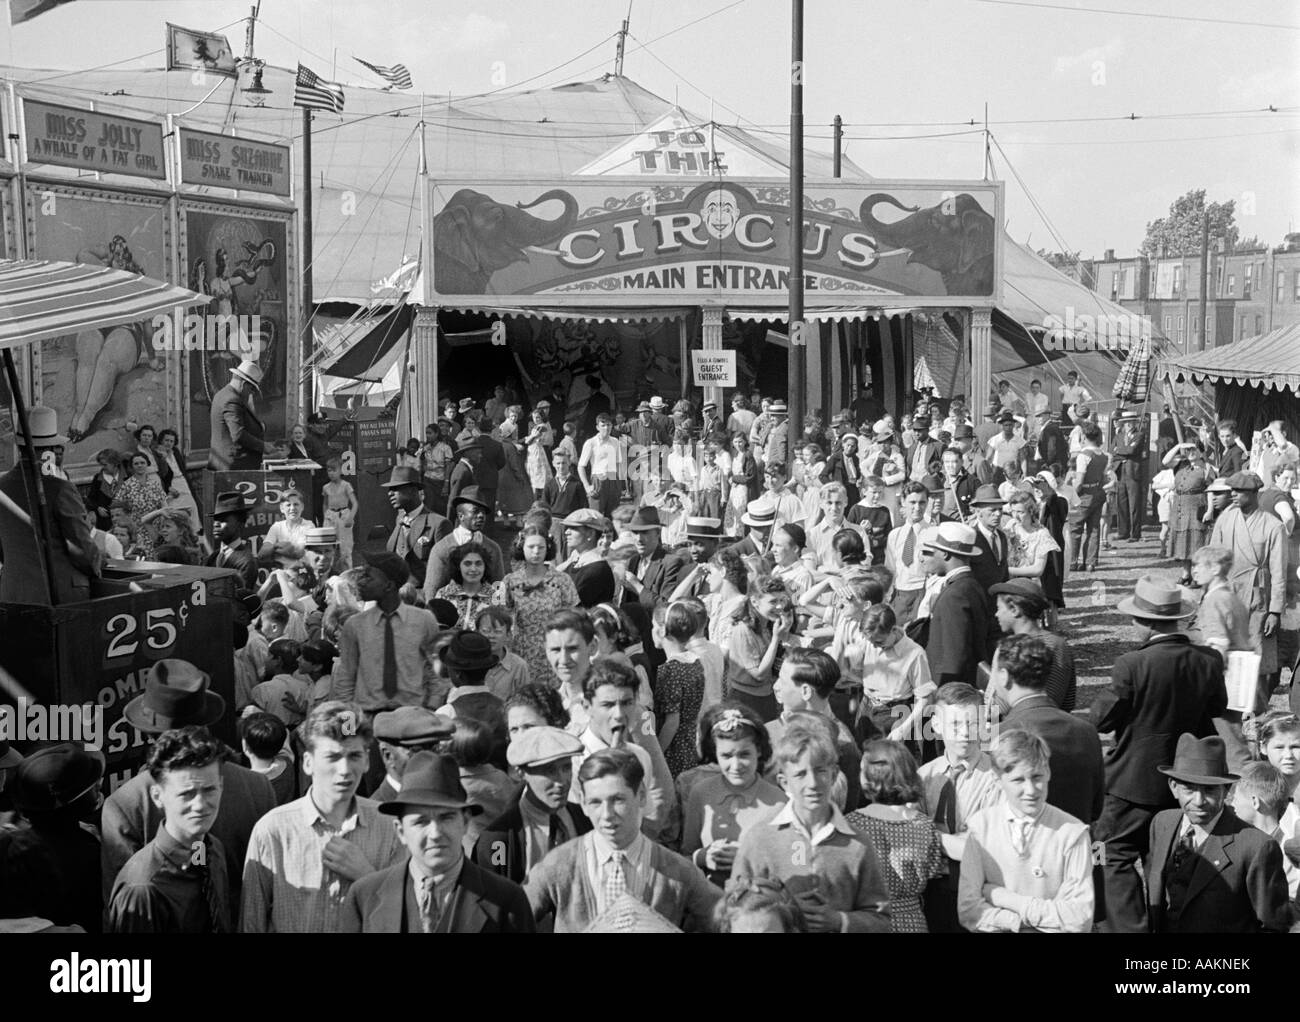 1940s CROWD OF PEOPLE MEN WOMEN CHILDREN CROWDING THE MIDWAY OUTSIDE THE MAIN ENTRANCE TO THE BIG TOP CIRCUS TENT Stock Photo